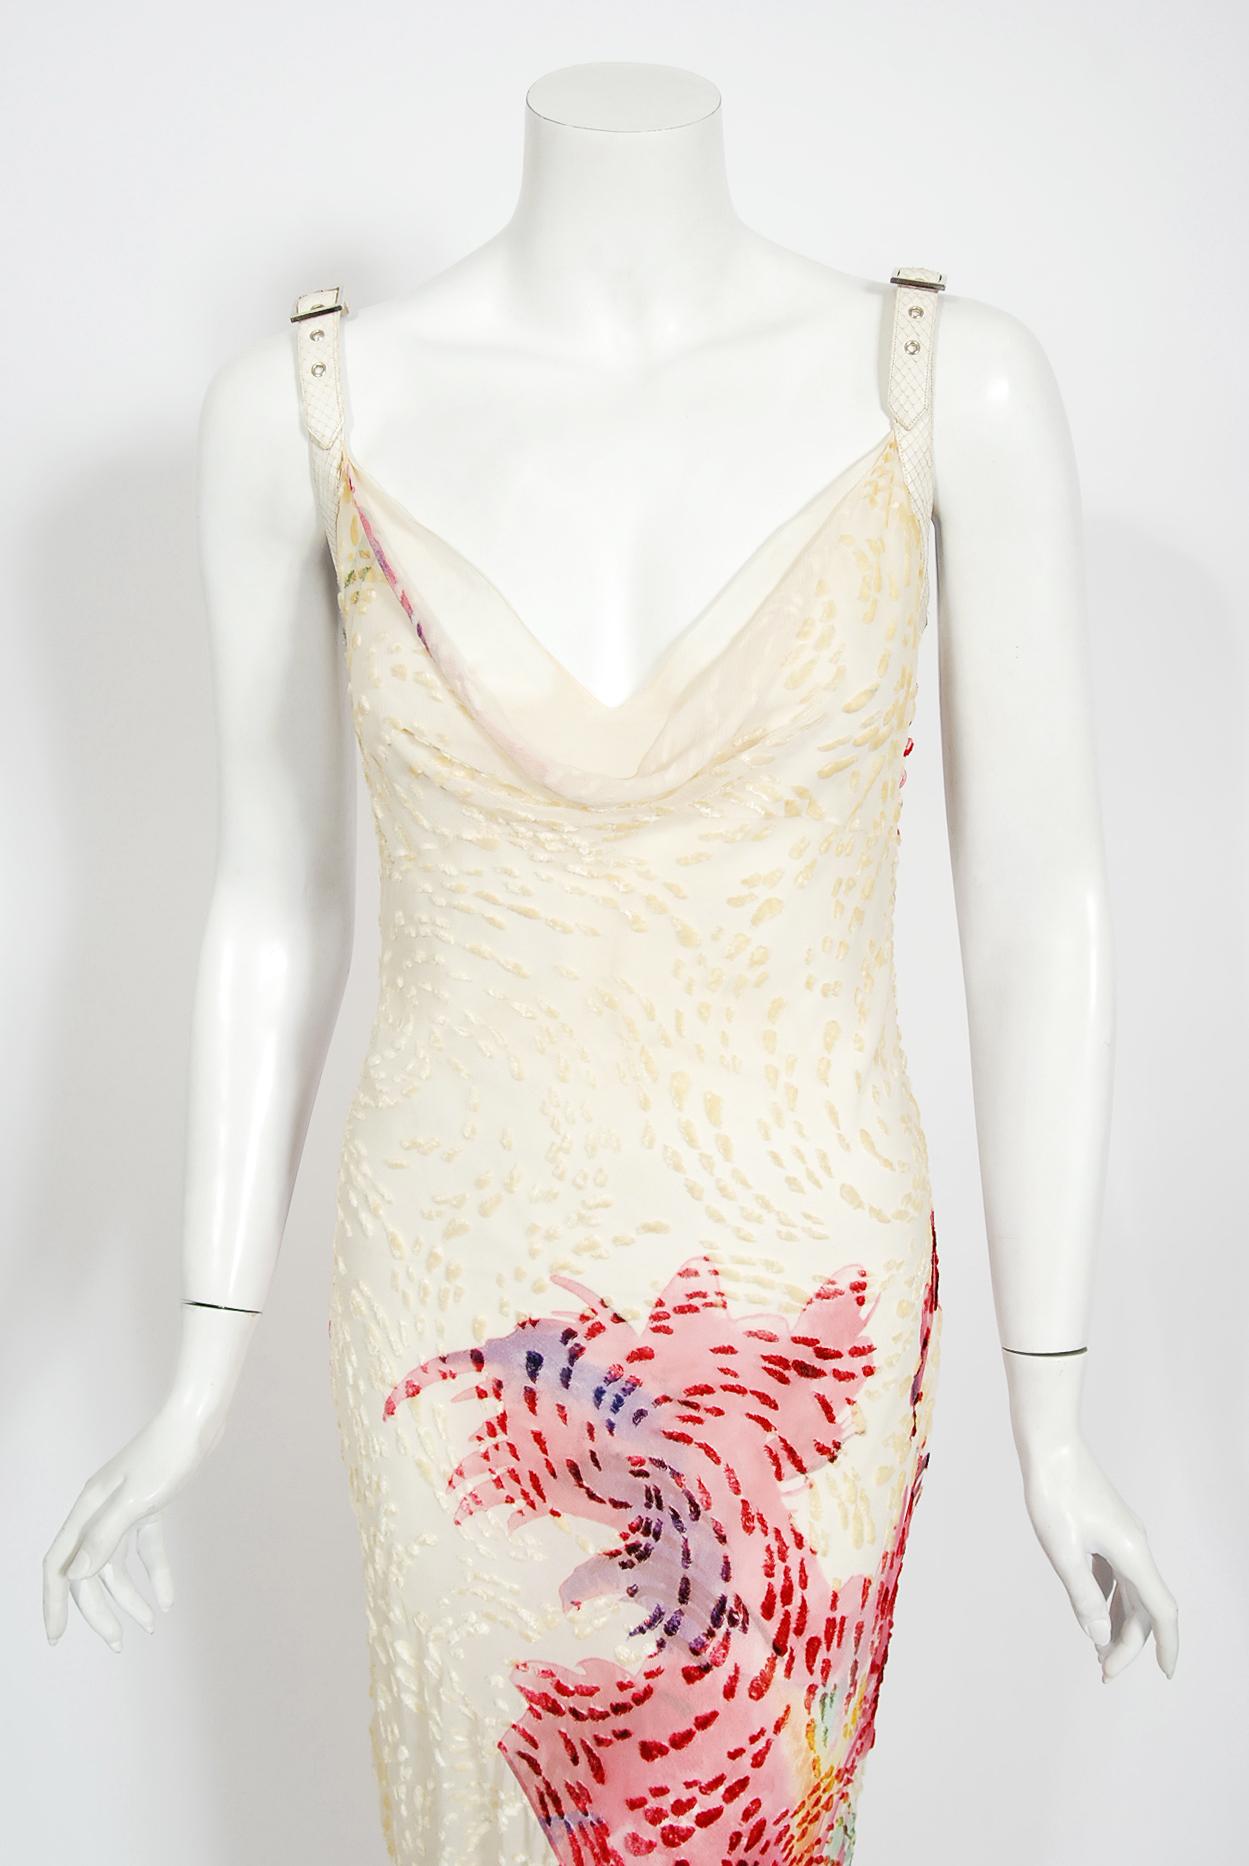 A simply stunning and ethereal Christian Dior large-scale watercolor floral silk bias-cut gown. Dior is probably the best known name in high fashion since the late 1940's. This rare Christian Dior treasure from John Galliano's coveted 2001